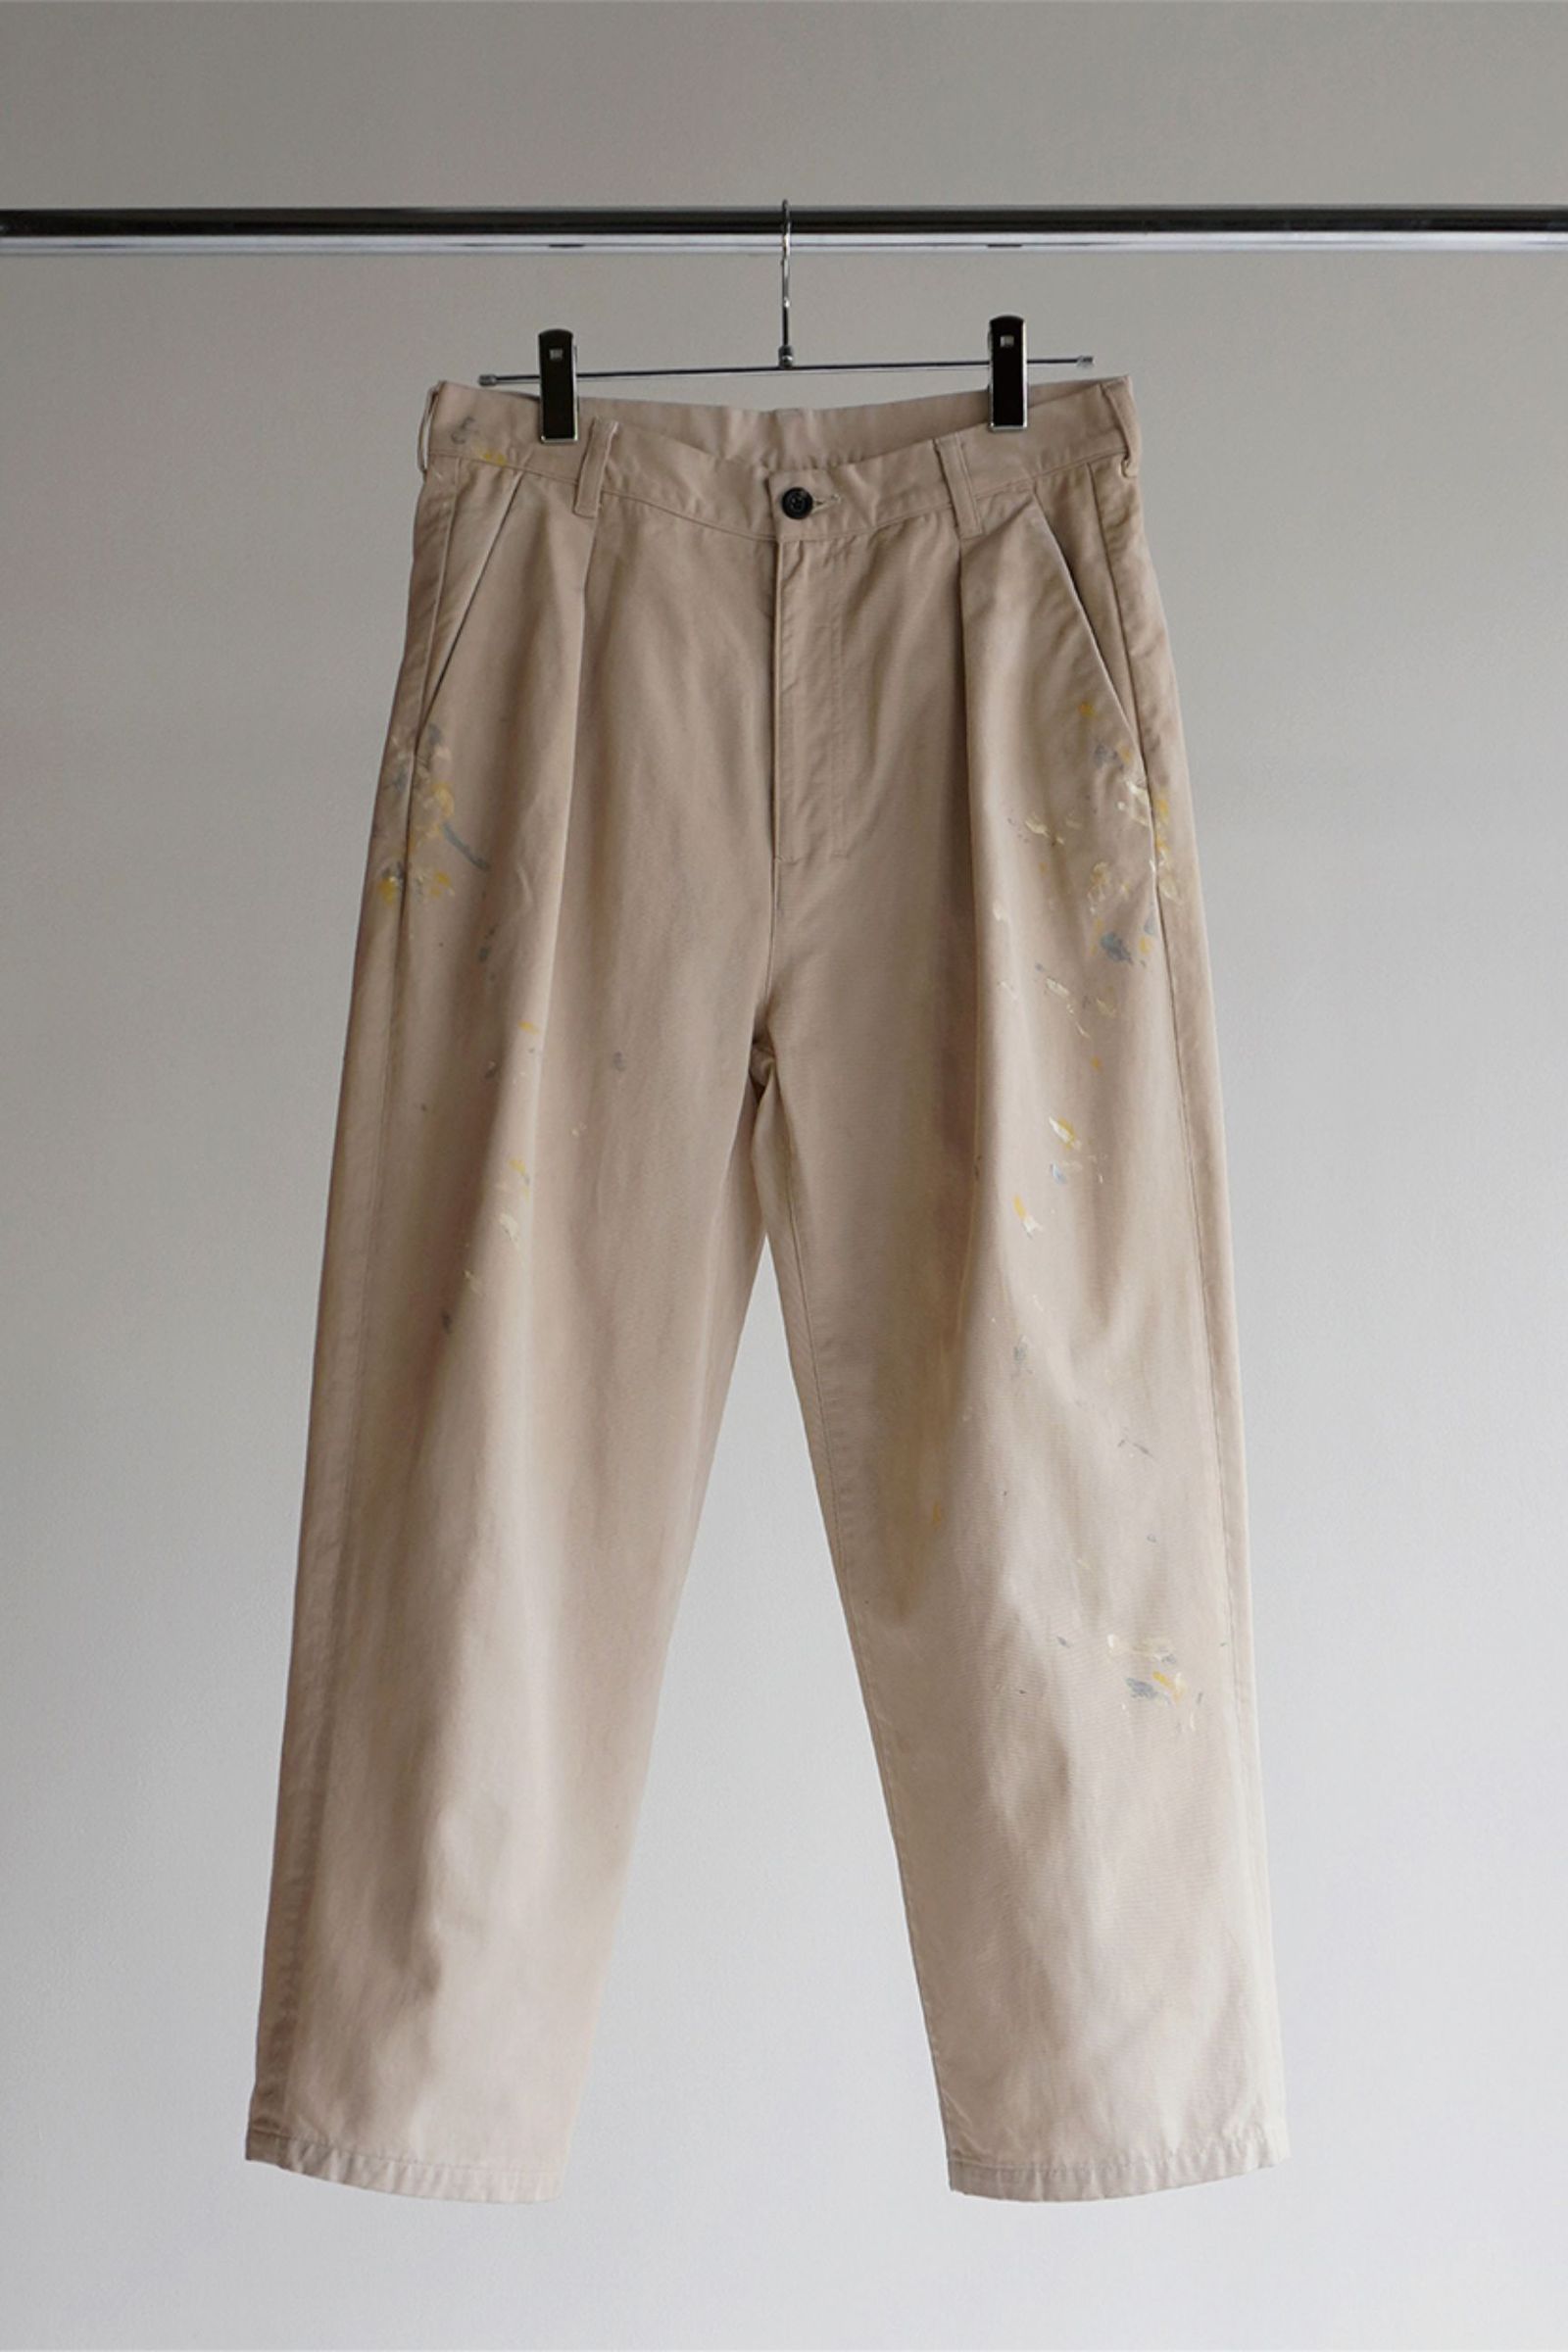 ANCELLM - PAINT CHINO TROUSERS/BEIGE | NapsNote